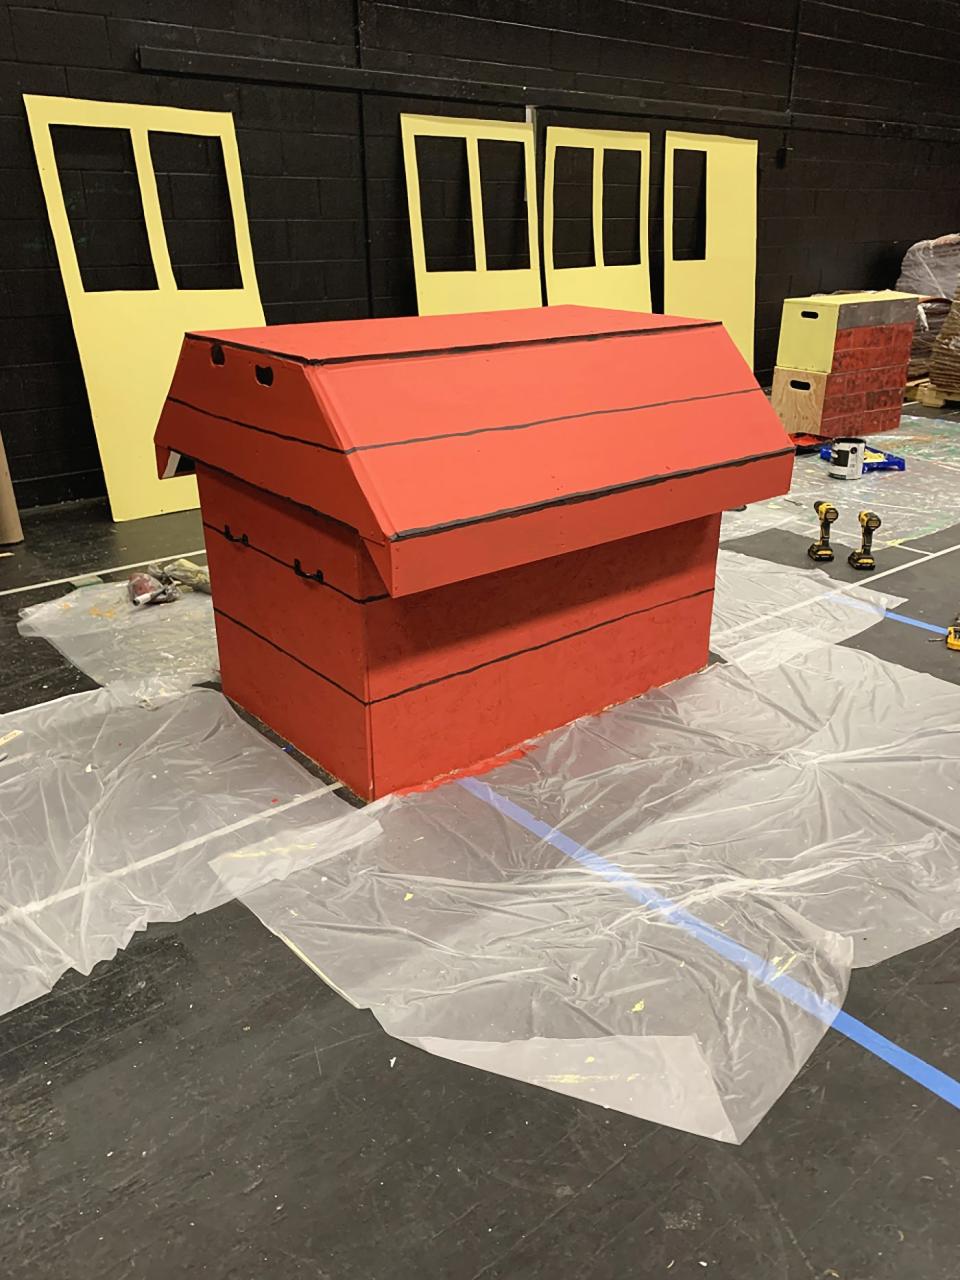 These sets are being painted for the Gardner High production of “You’re a Good Man, Charlie Brown.”